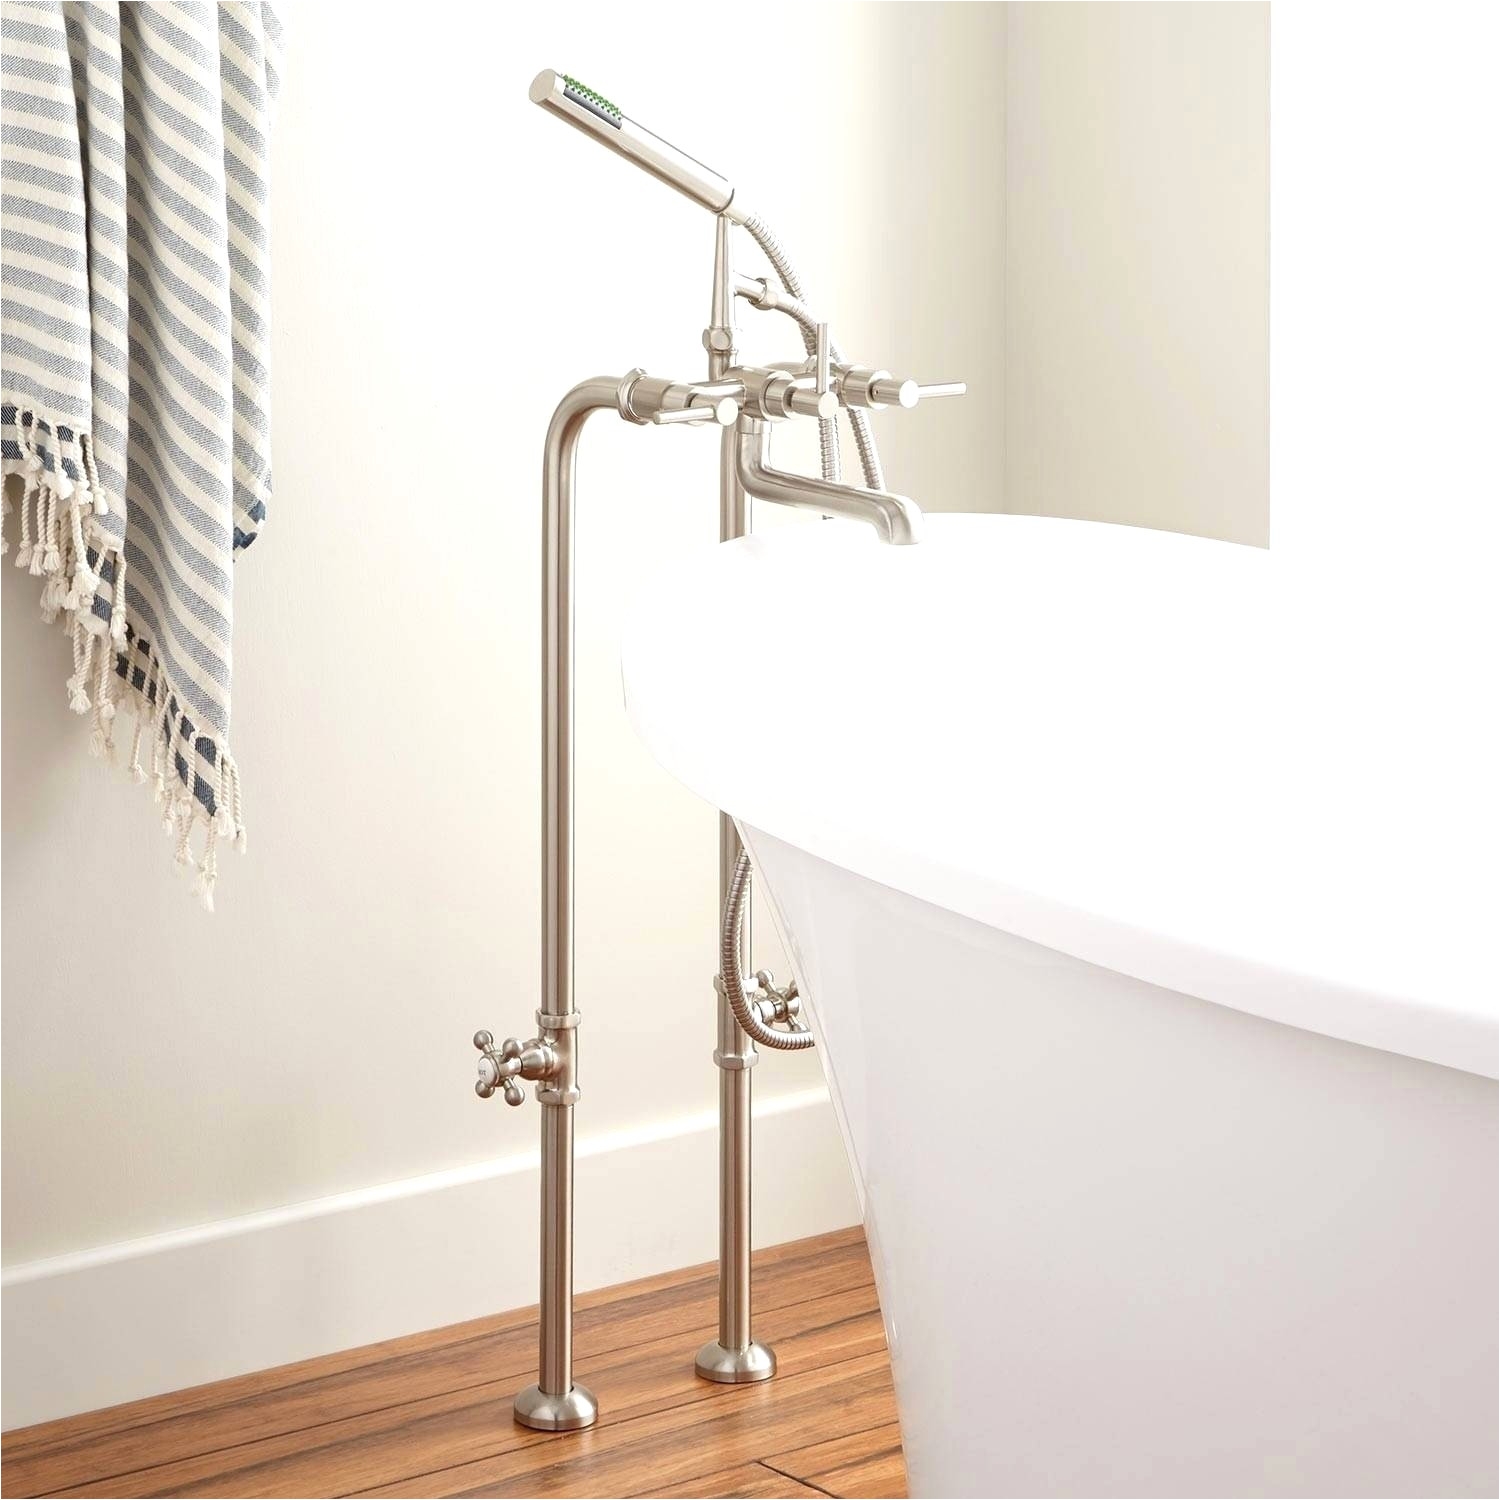 replace kitchen sink beautiful replacing a kitchen faucet luxury lovely bathtub faucet set h sink